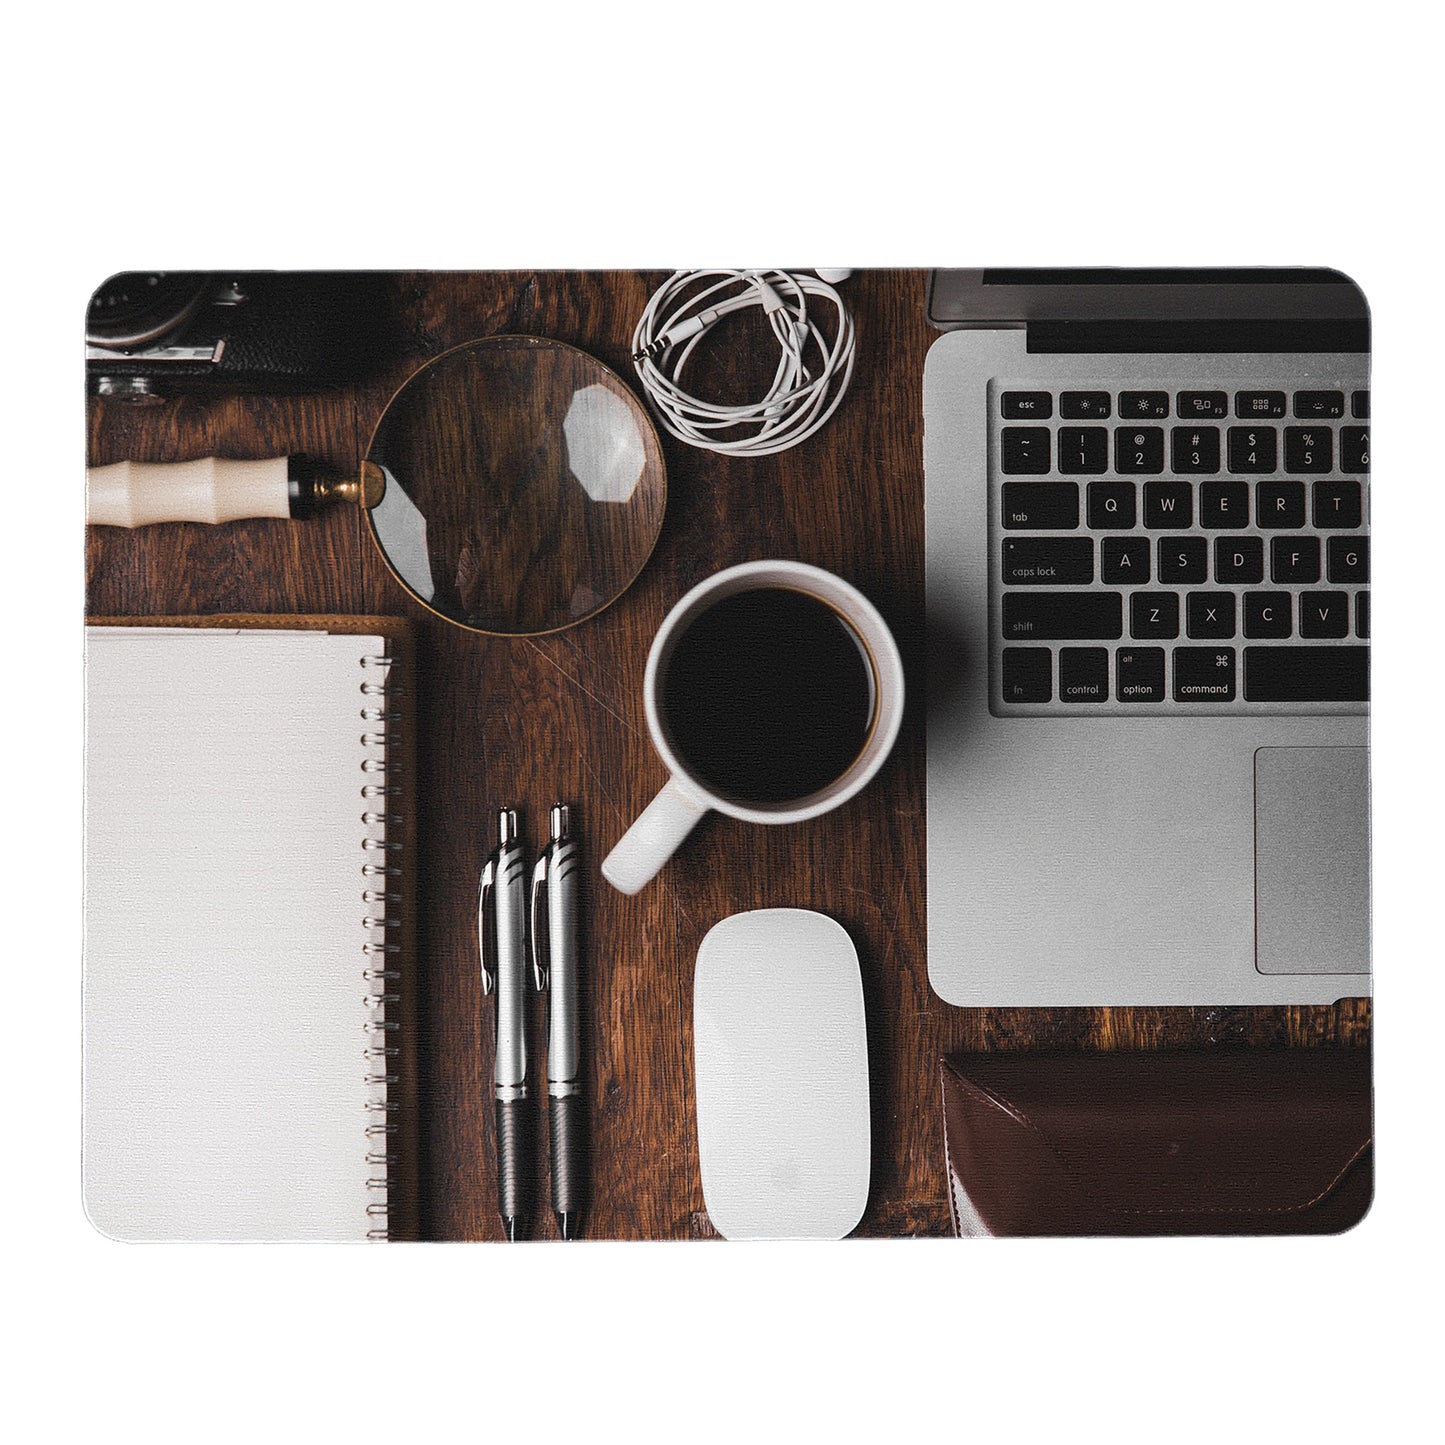 Corporate Workspace Mouse Pad